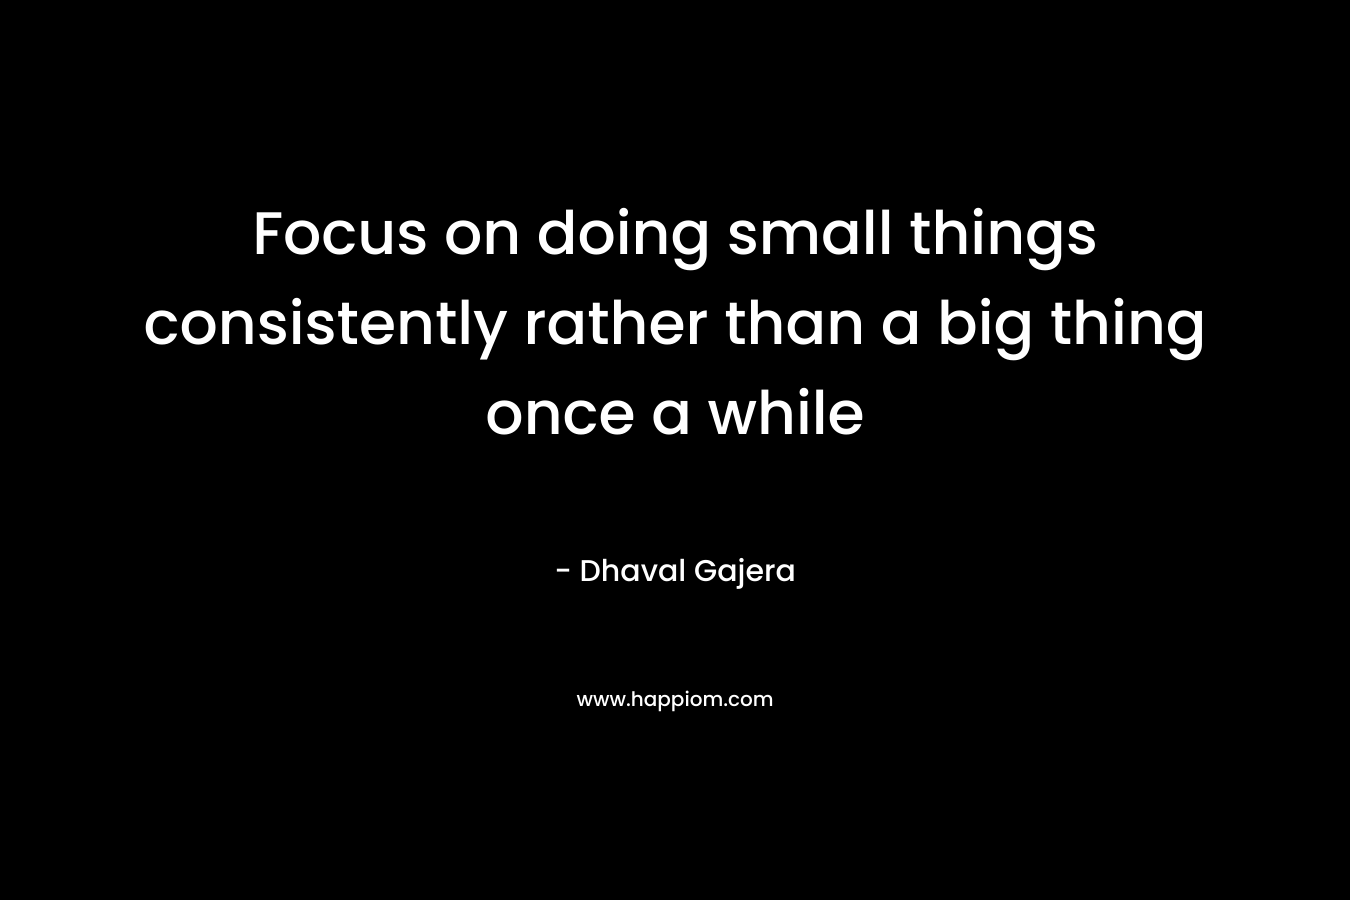 Focus on doing small things consistently rather than a big thing once a while